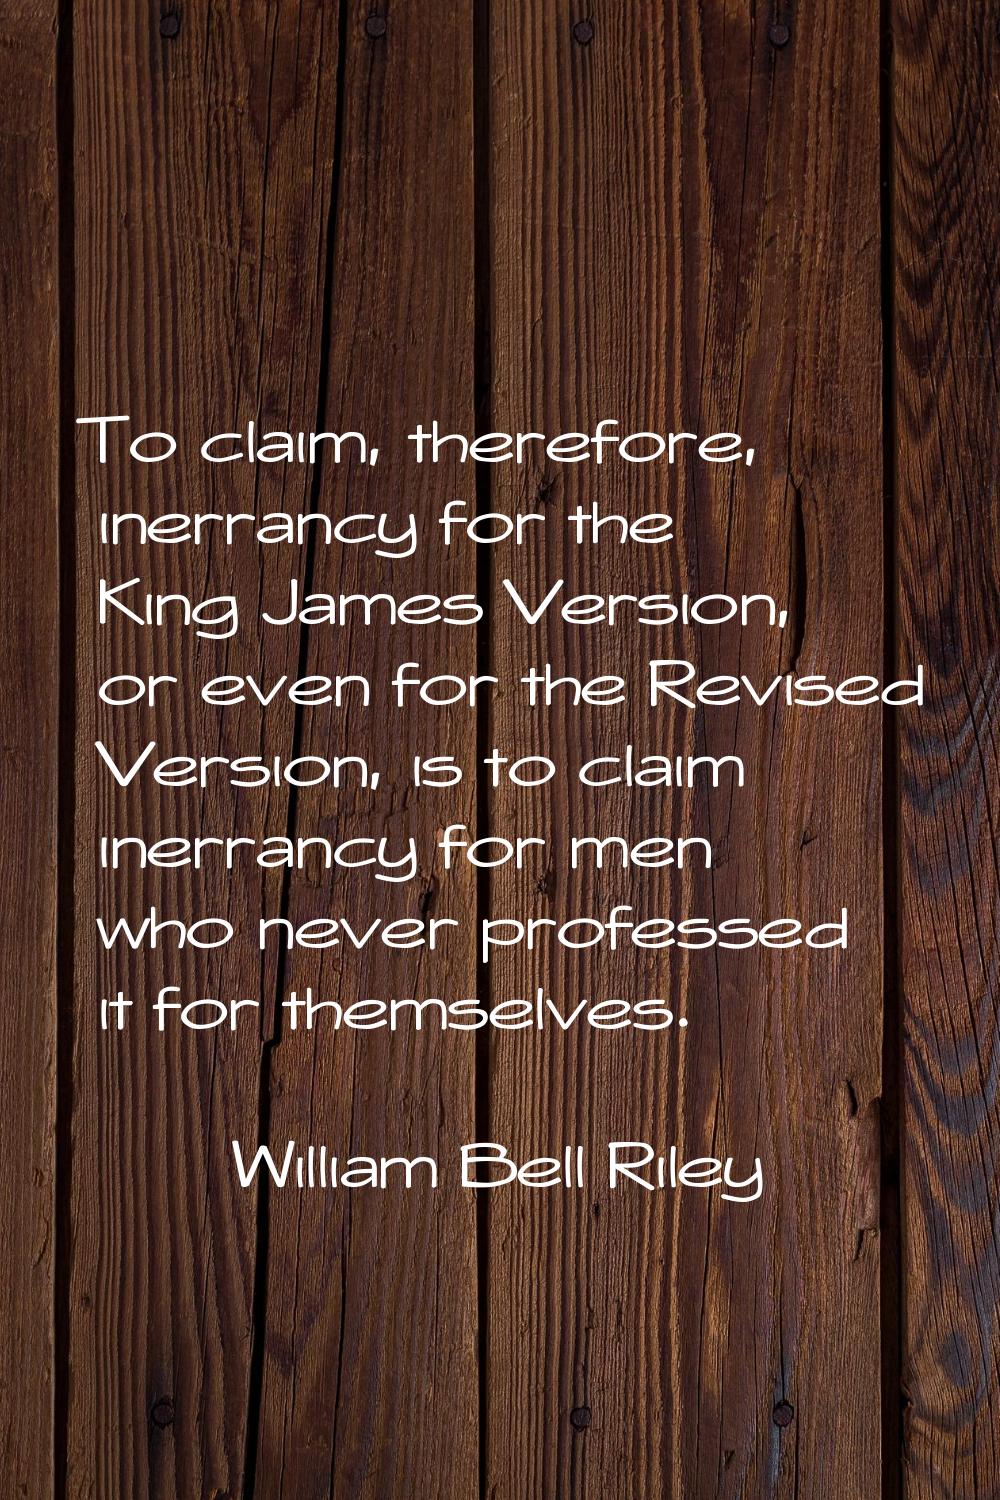 To claim, therefore, inerrancy for the King James Version, or even for the Revised Version, is to c